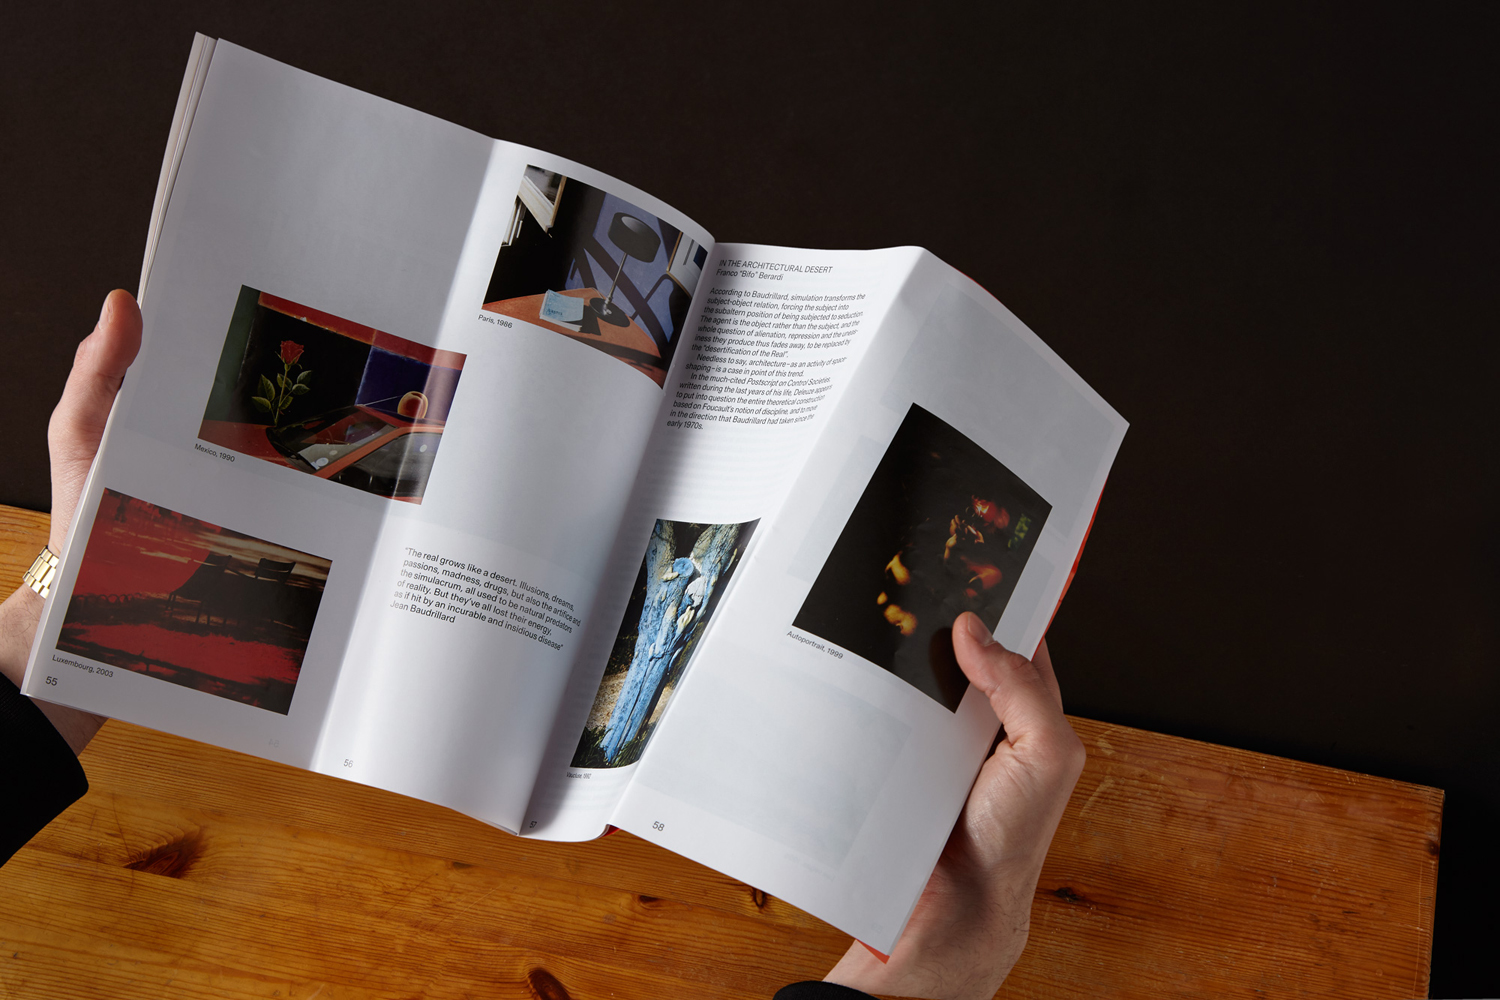 BP&O takes a hands on look at quarterly magazine Real Review designed by OK-RM created and edited by Jack Self